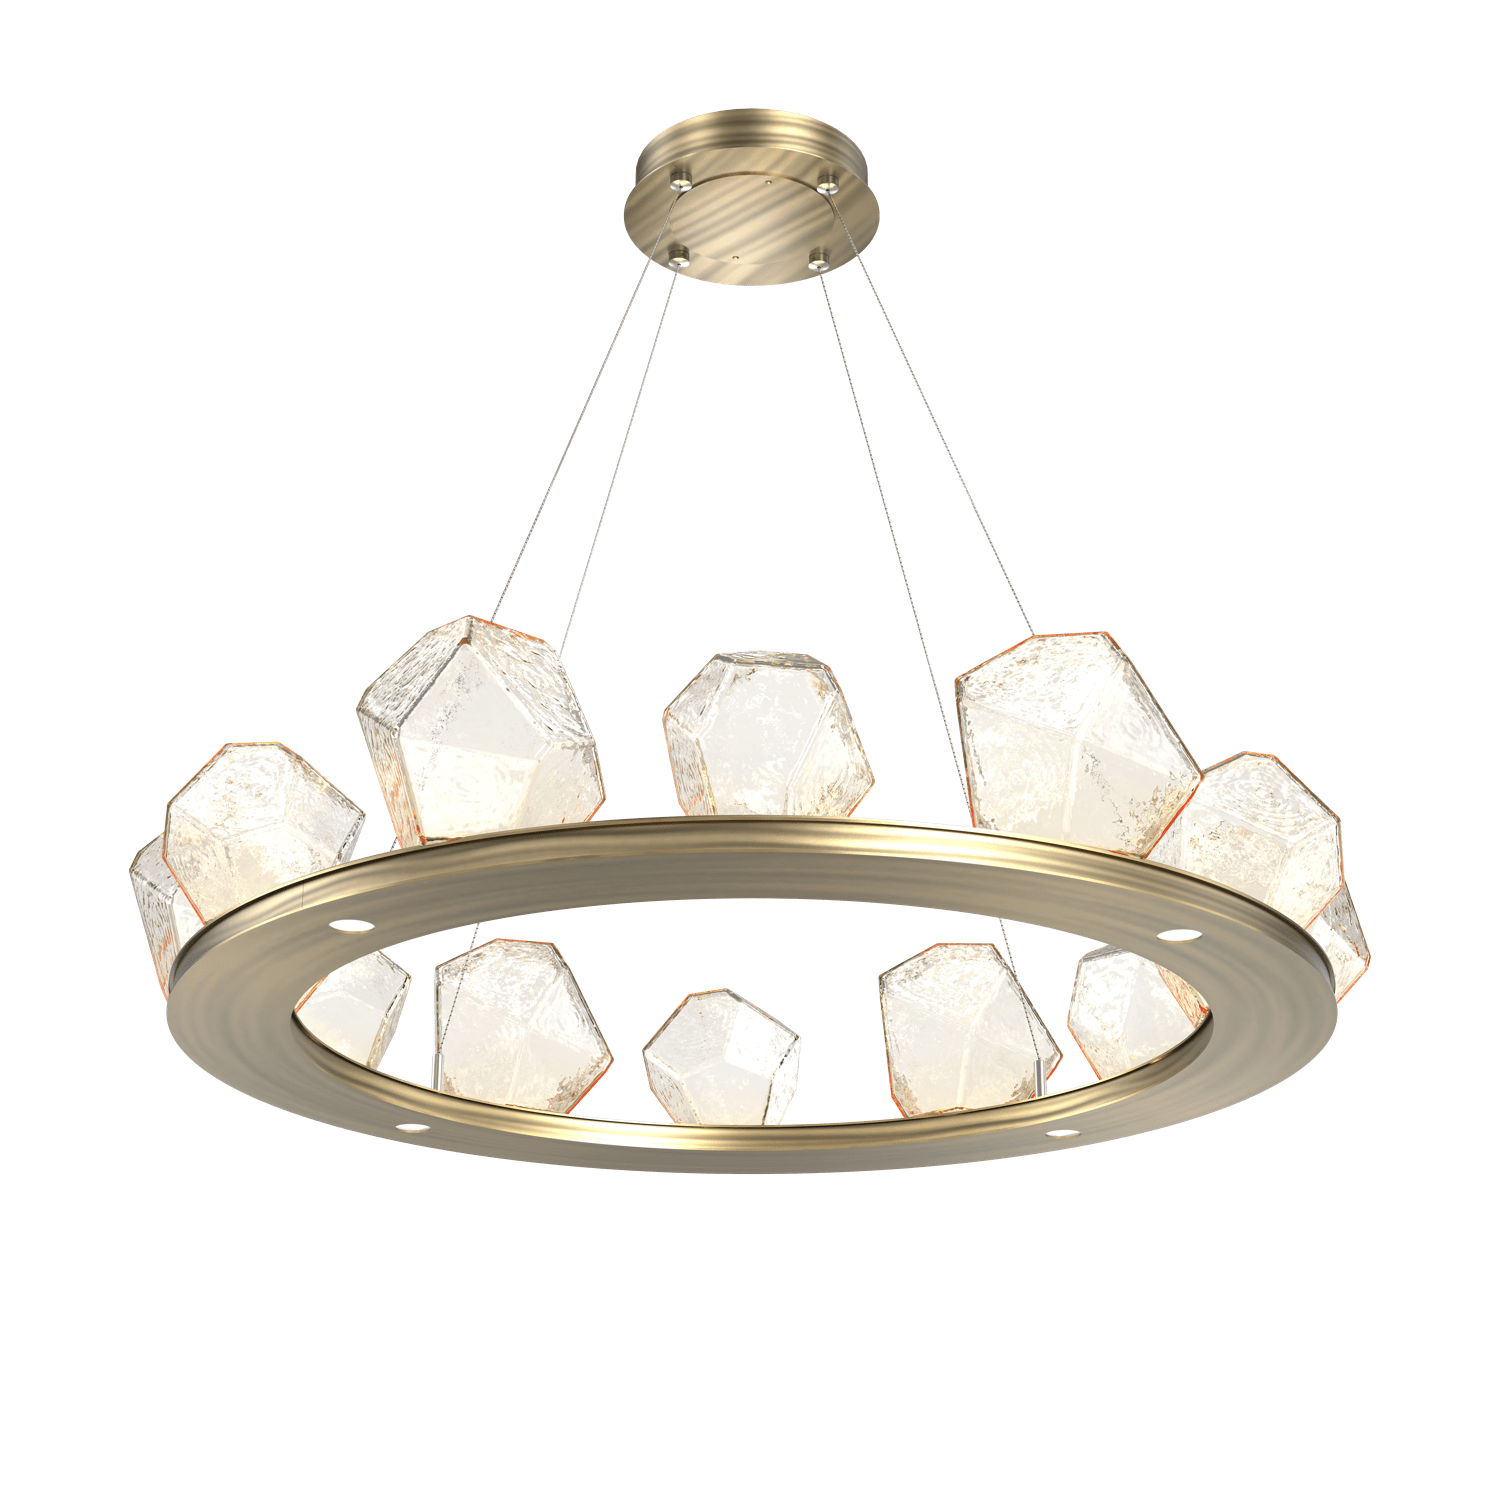 CHB0039-0C-HB-A-Hammerton-Studio-Gem-37-inch-ring-chandelier-with-heritage-brass-finish-and-amber-blown-glass-shades-and-LED-lamping